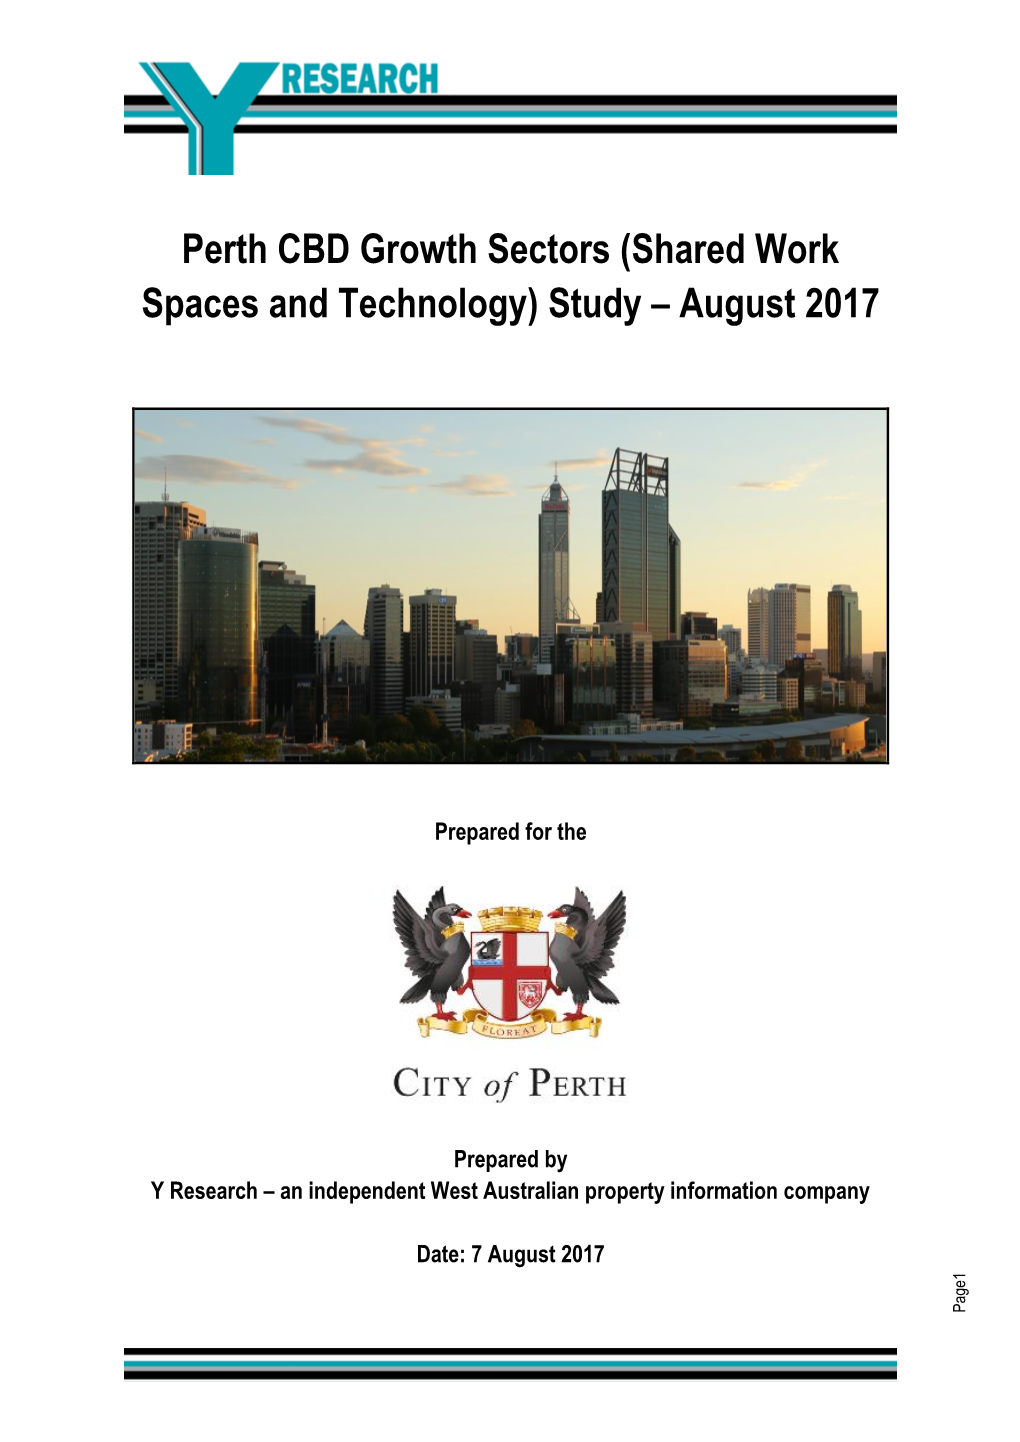 Perth CBD Growth Sectors (Shared Work Spaces and Technology) Study – August 2017